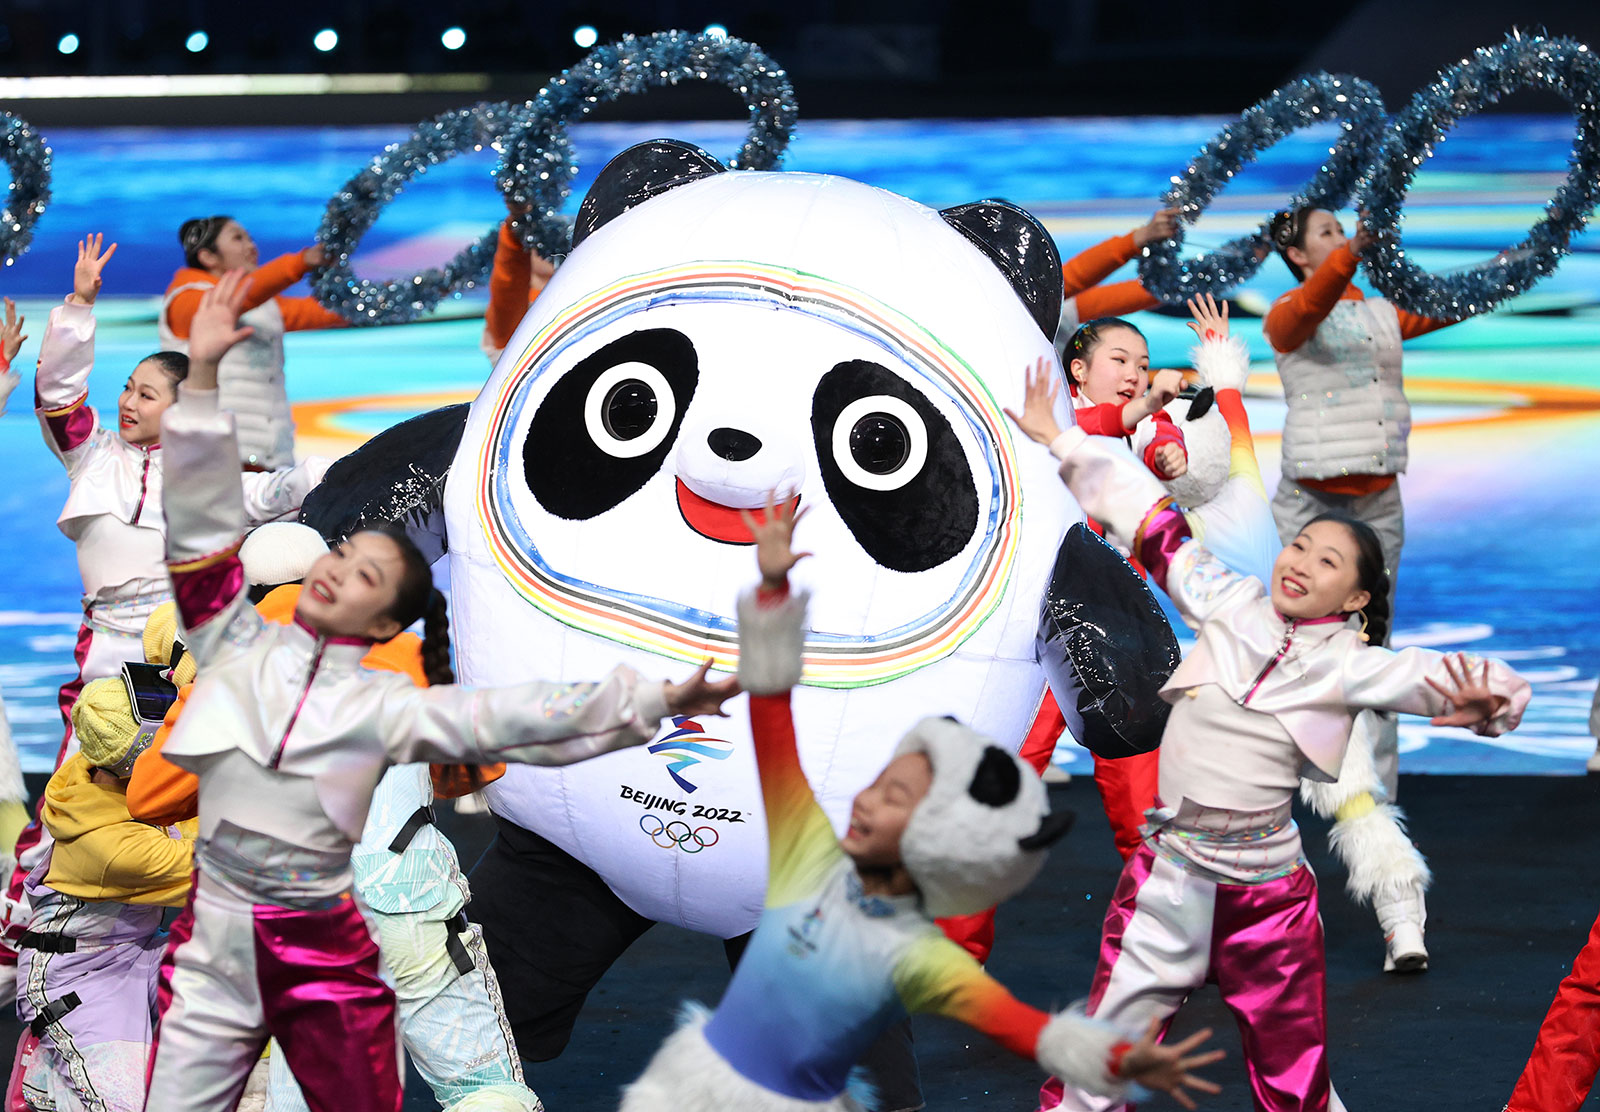 Beijing 2022 mascot Bing Dwen Dwen, seen here before the Opening Ceremony on February 4, has been a hit with fans around the world.